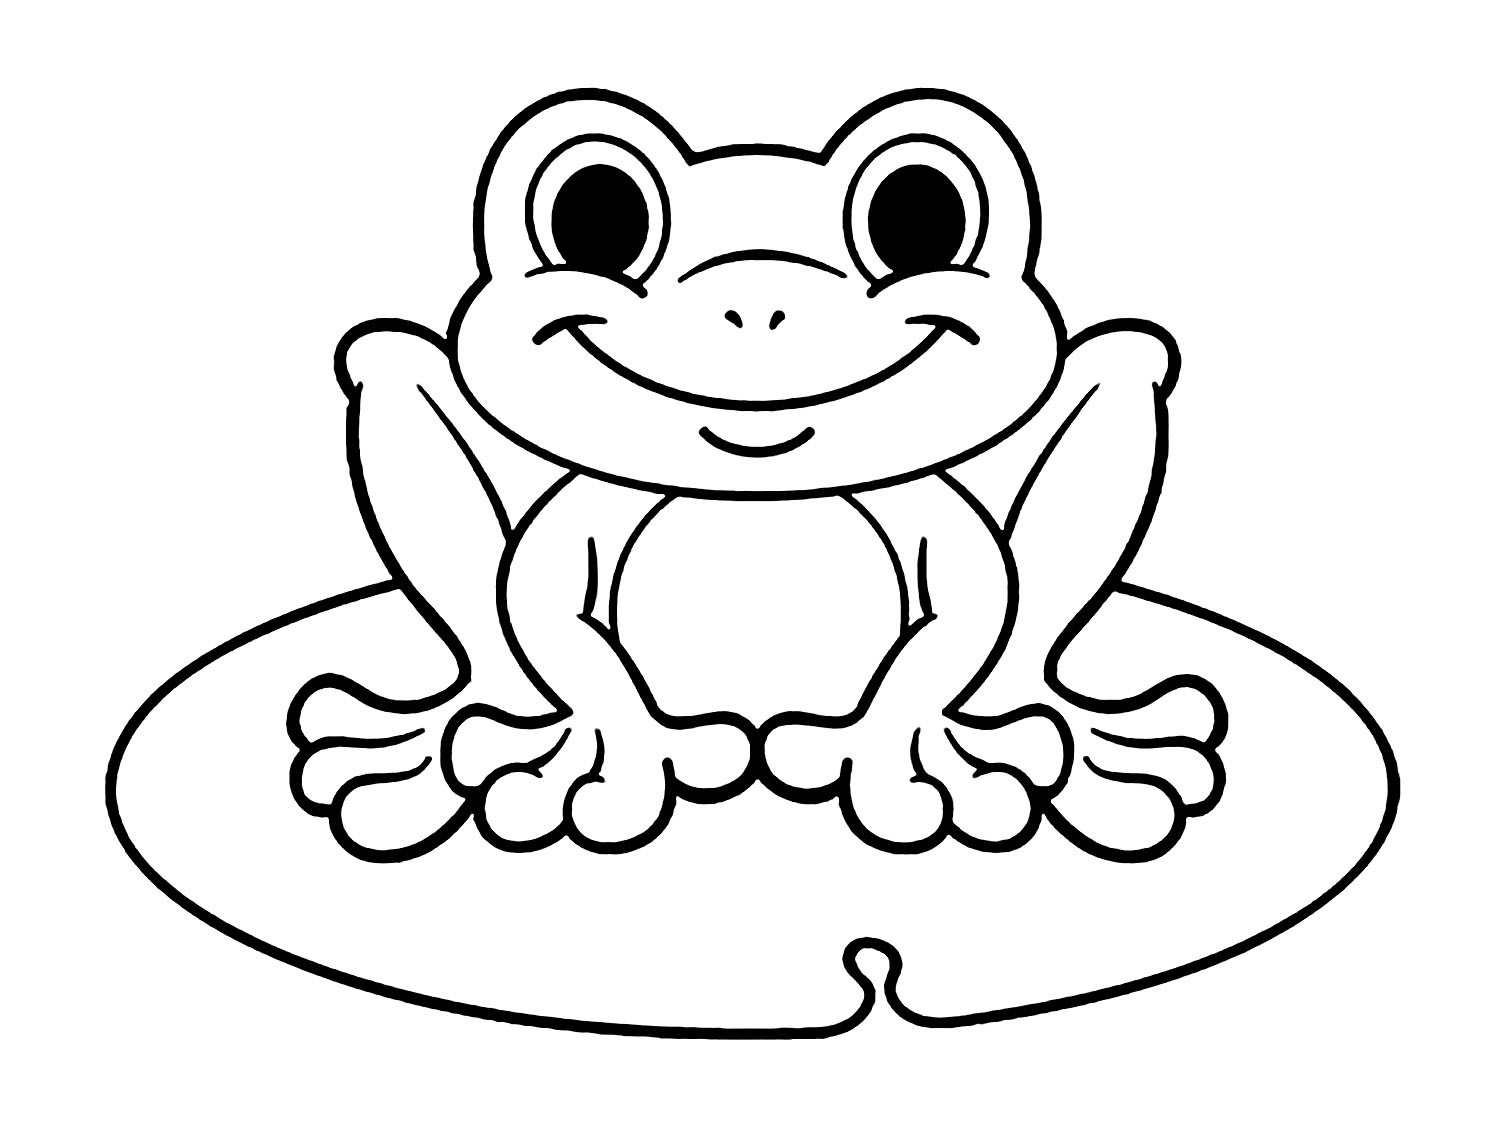 Baby Frog Coloring Pages
 Frogs to print for free Frogs Kids Coloring Pages